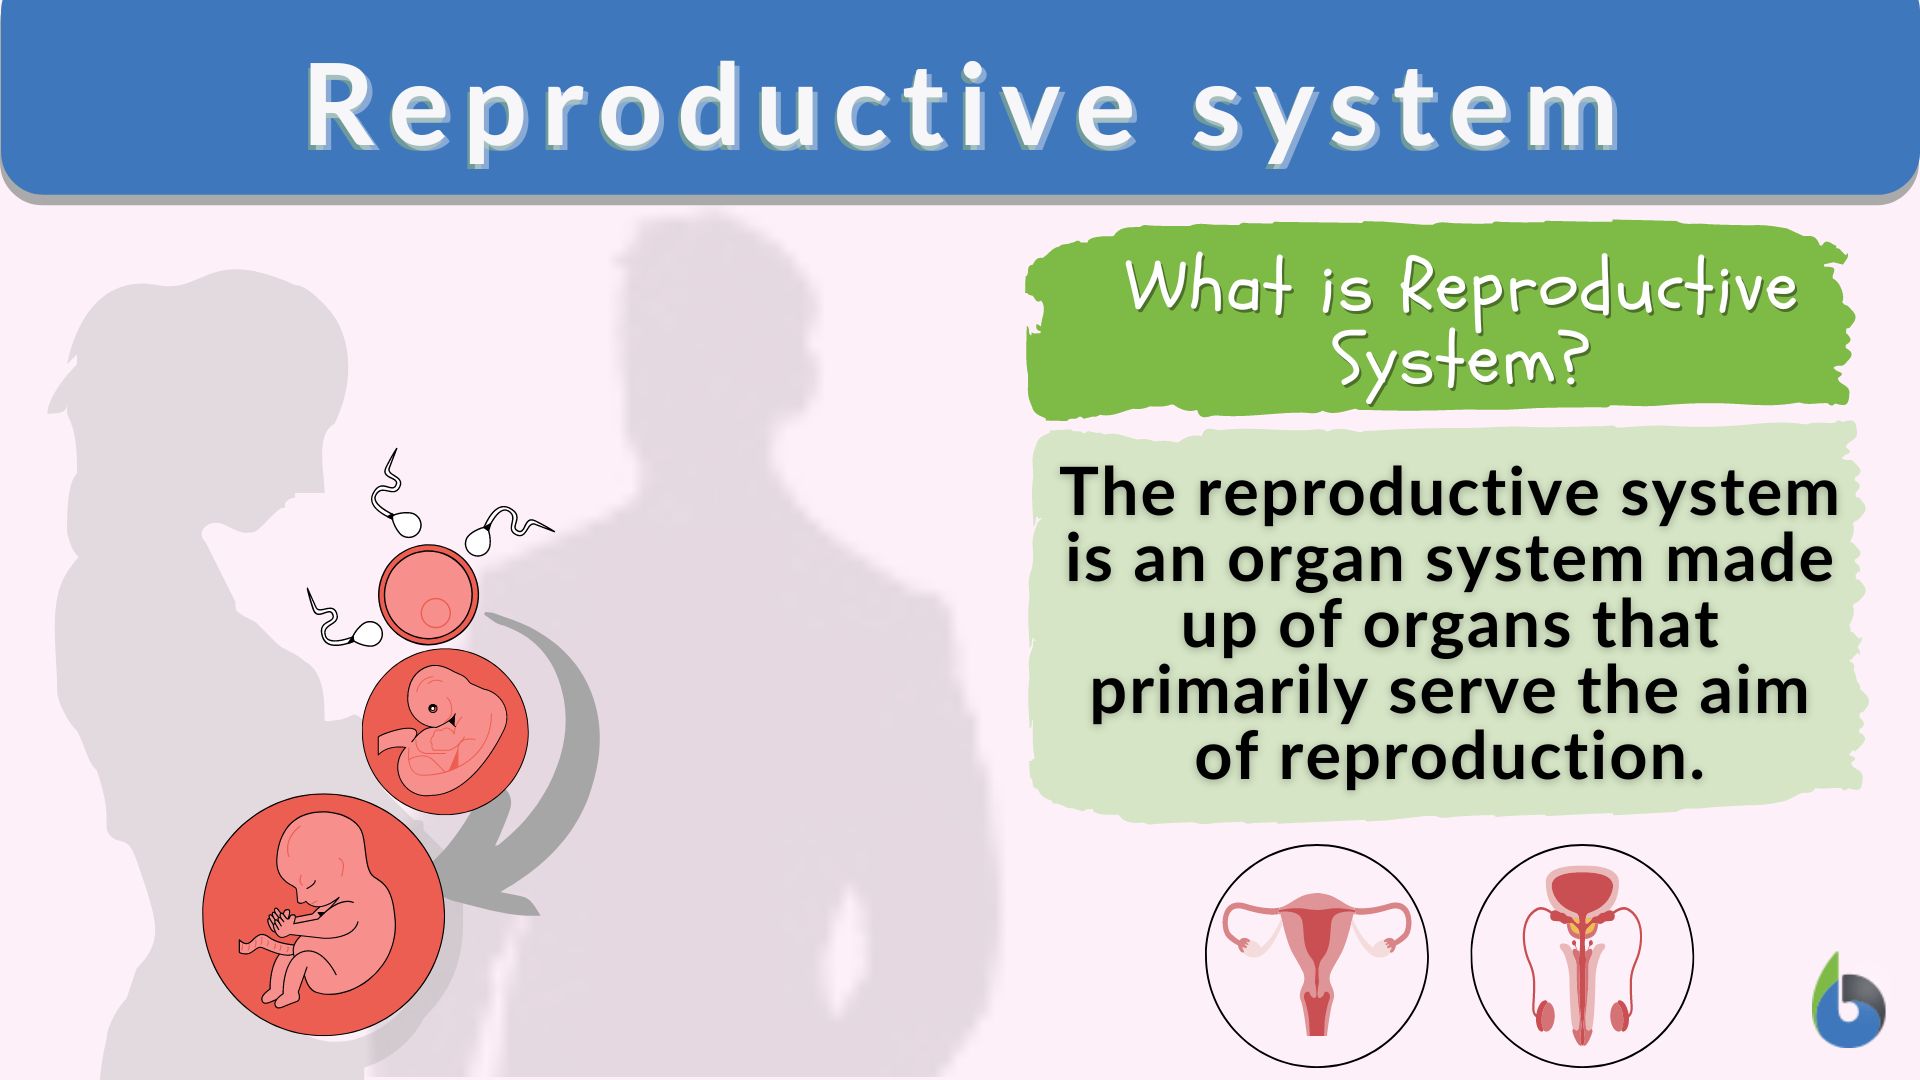 Female Reproductive System: Parts & Functions